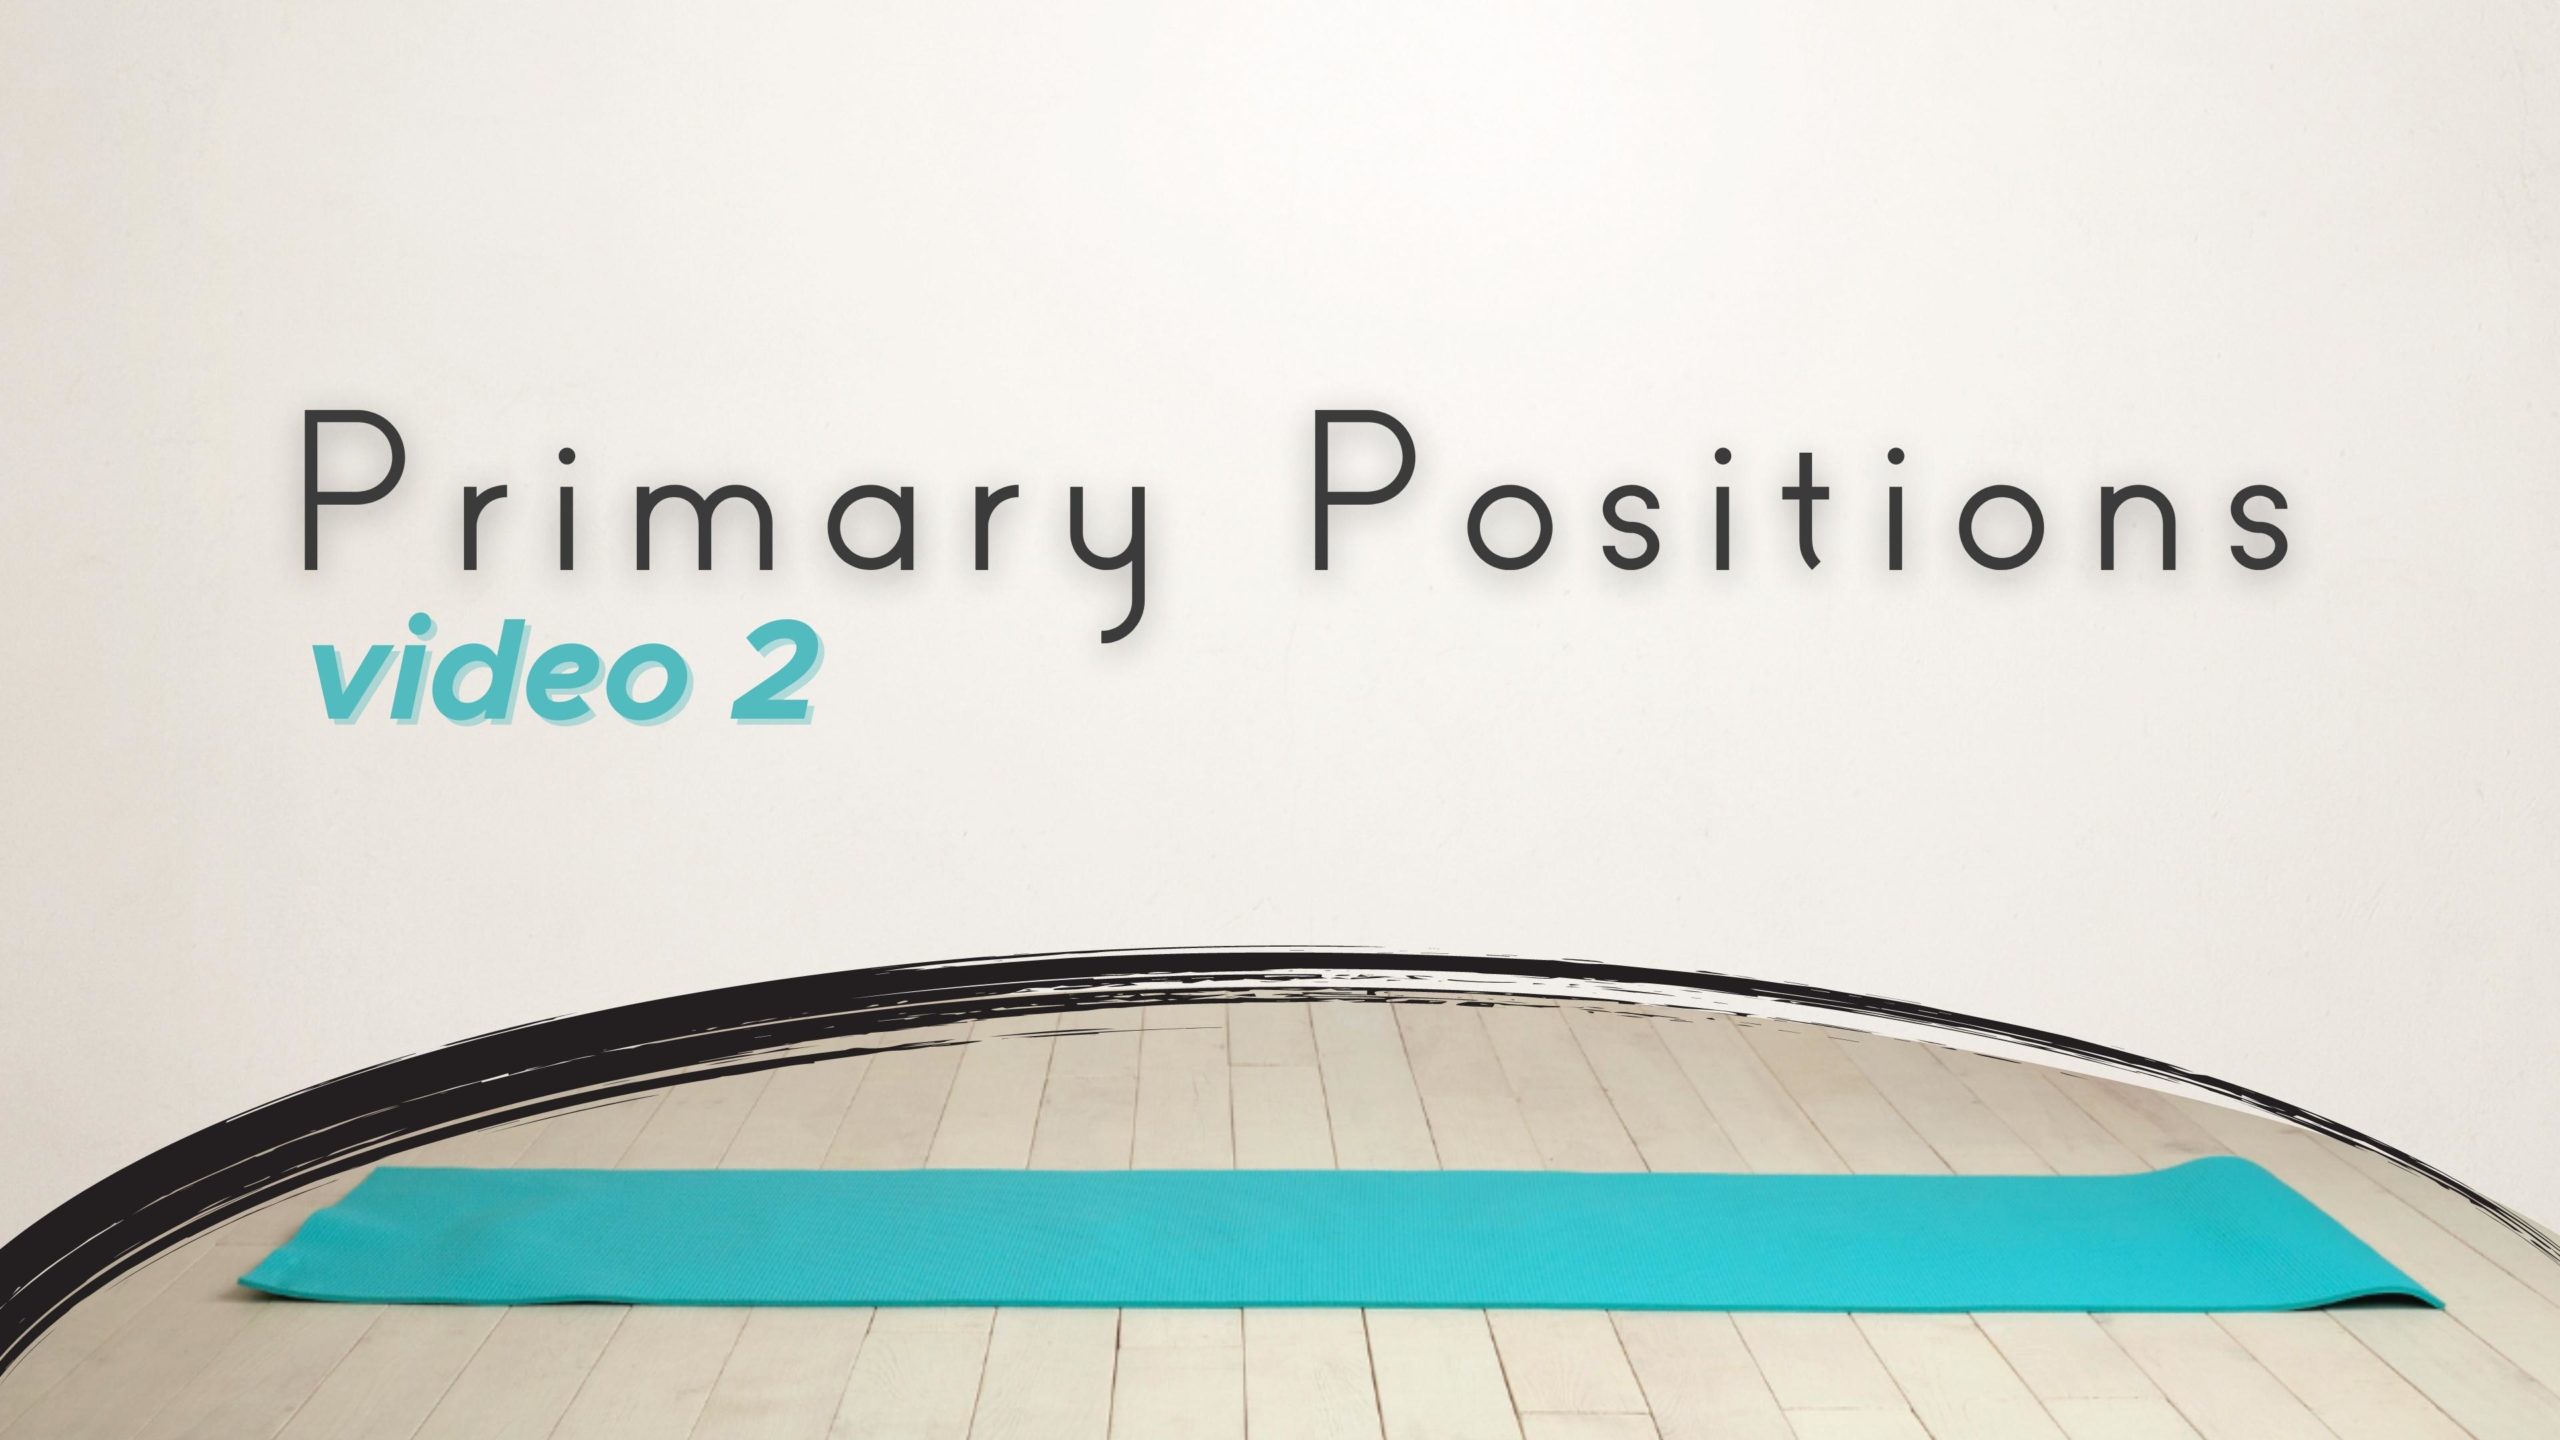 Primary Positions Video 2